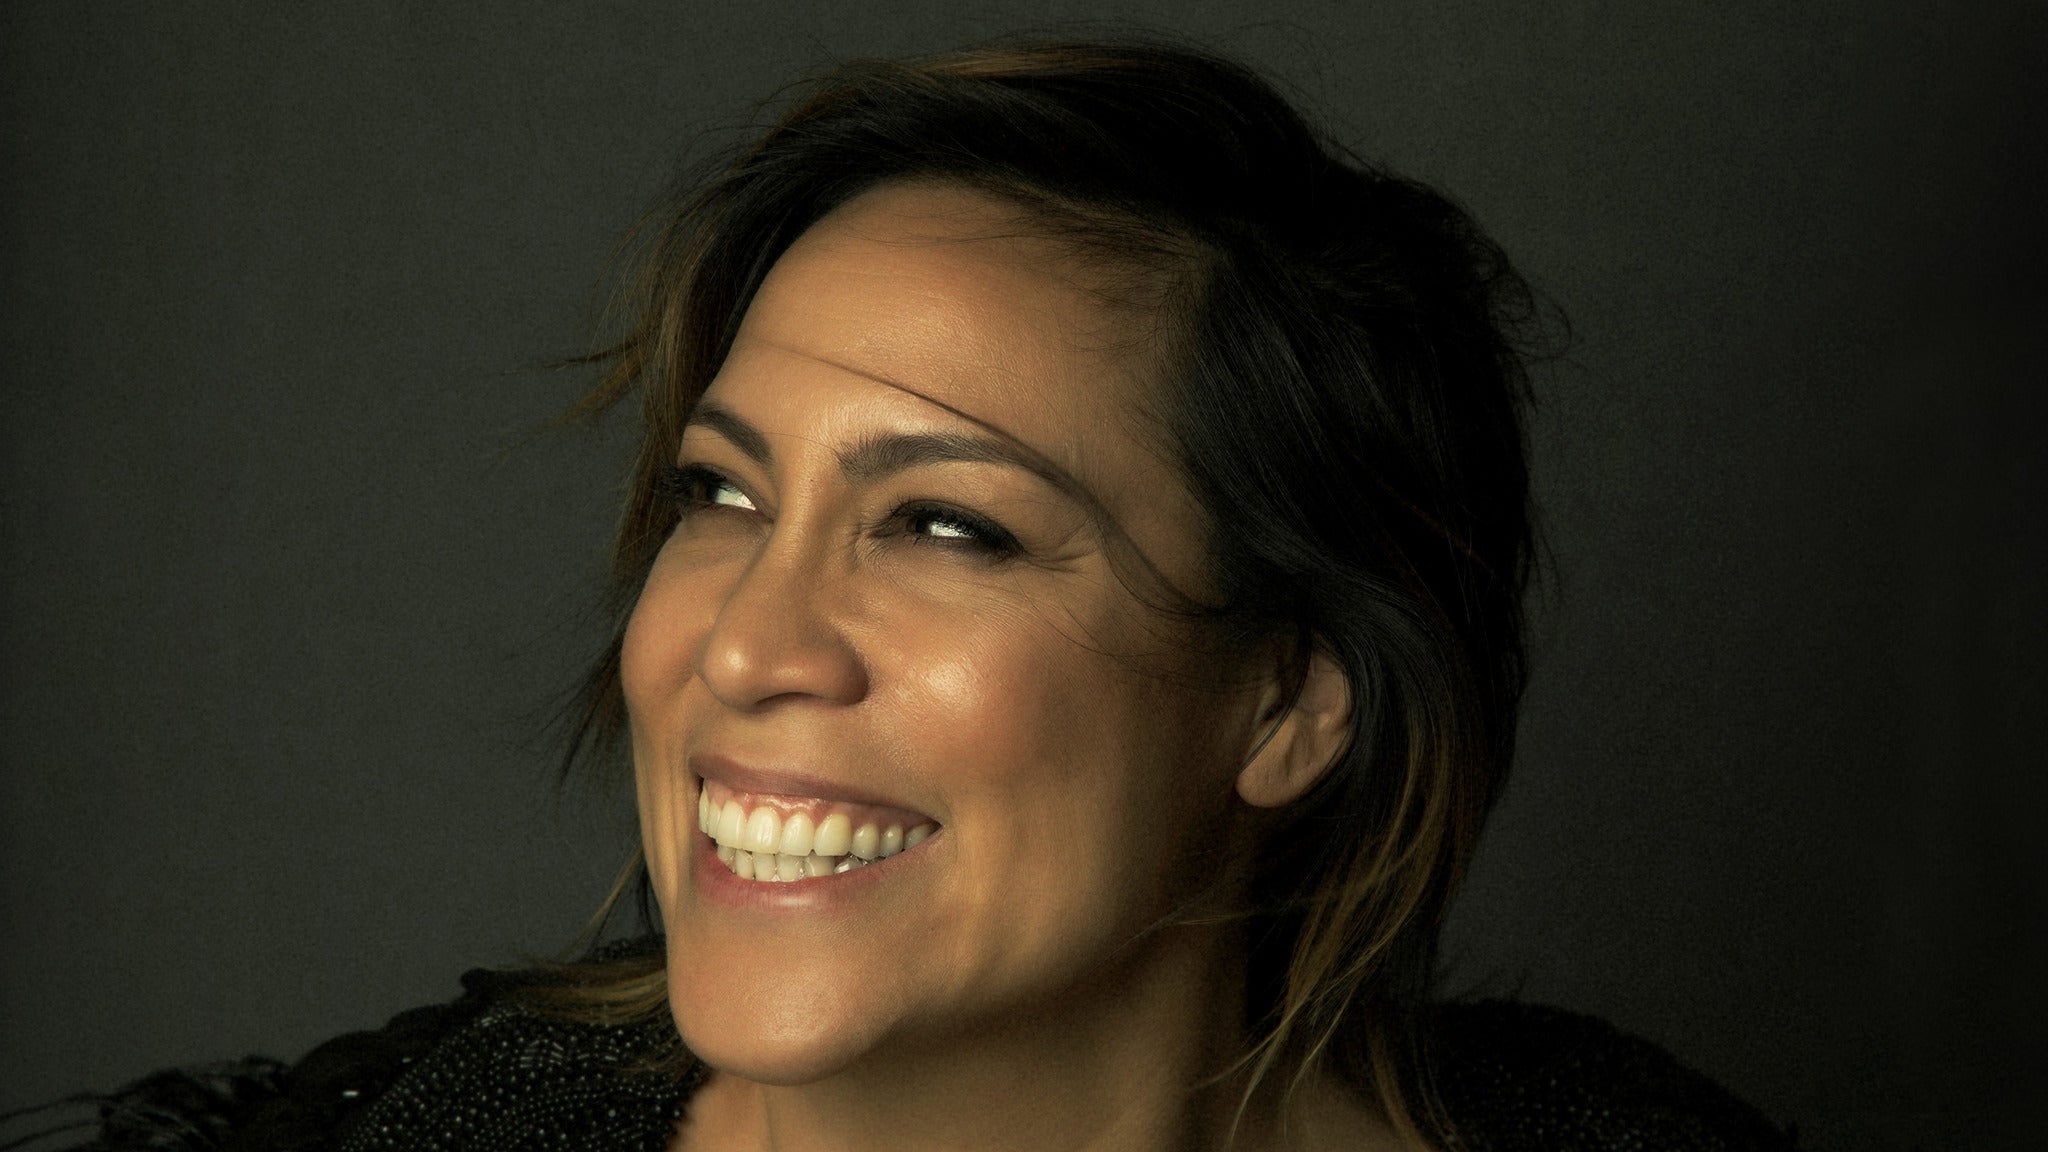 Image used with permission from Ticketmaster | KATE CEBERANO Sweet Inspiration Tour tickets